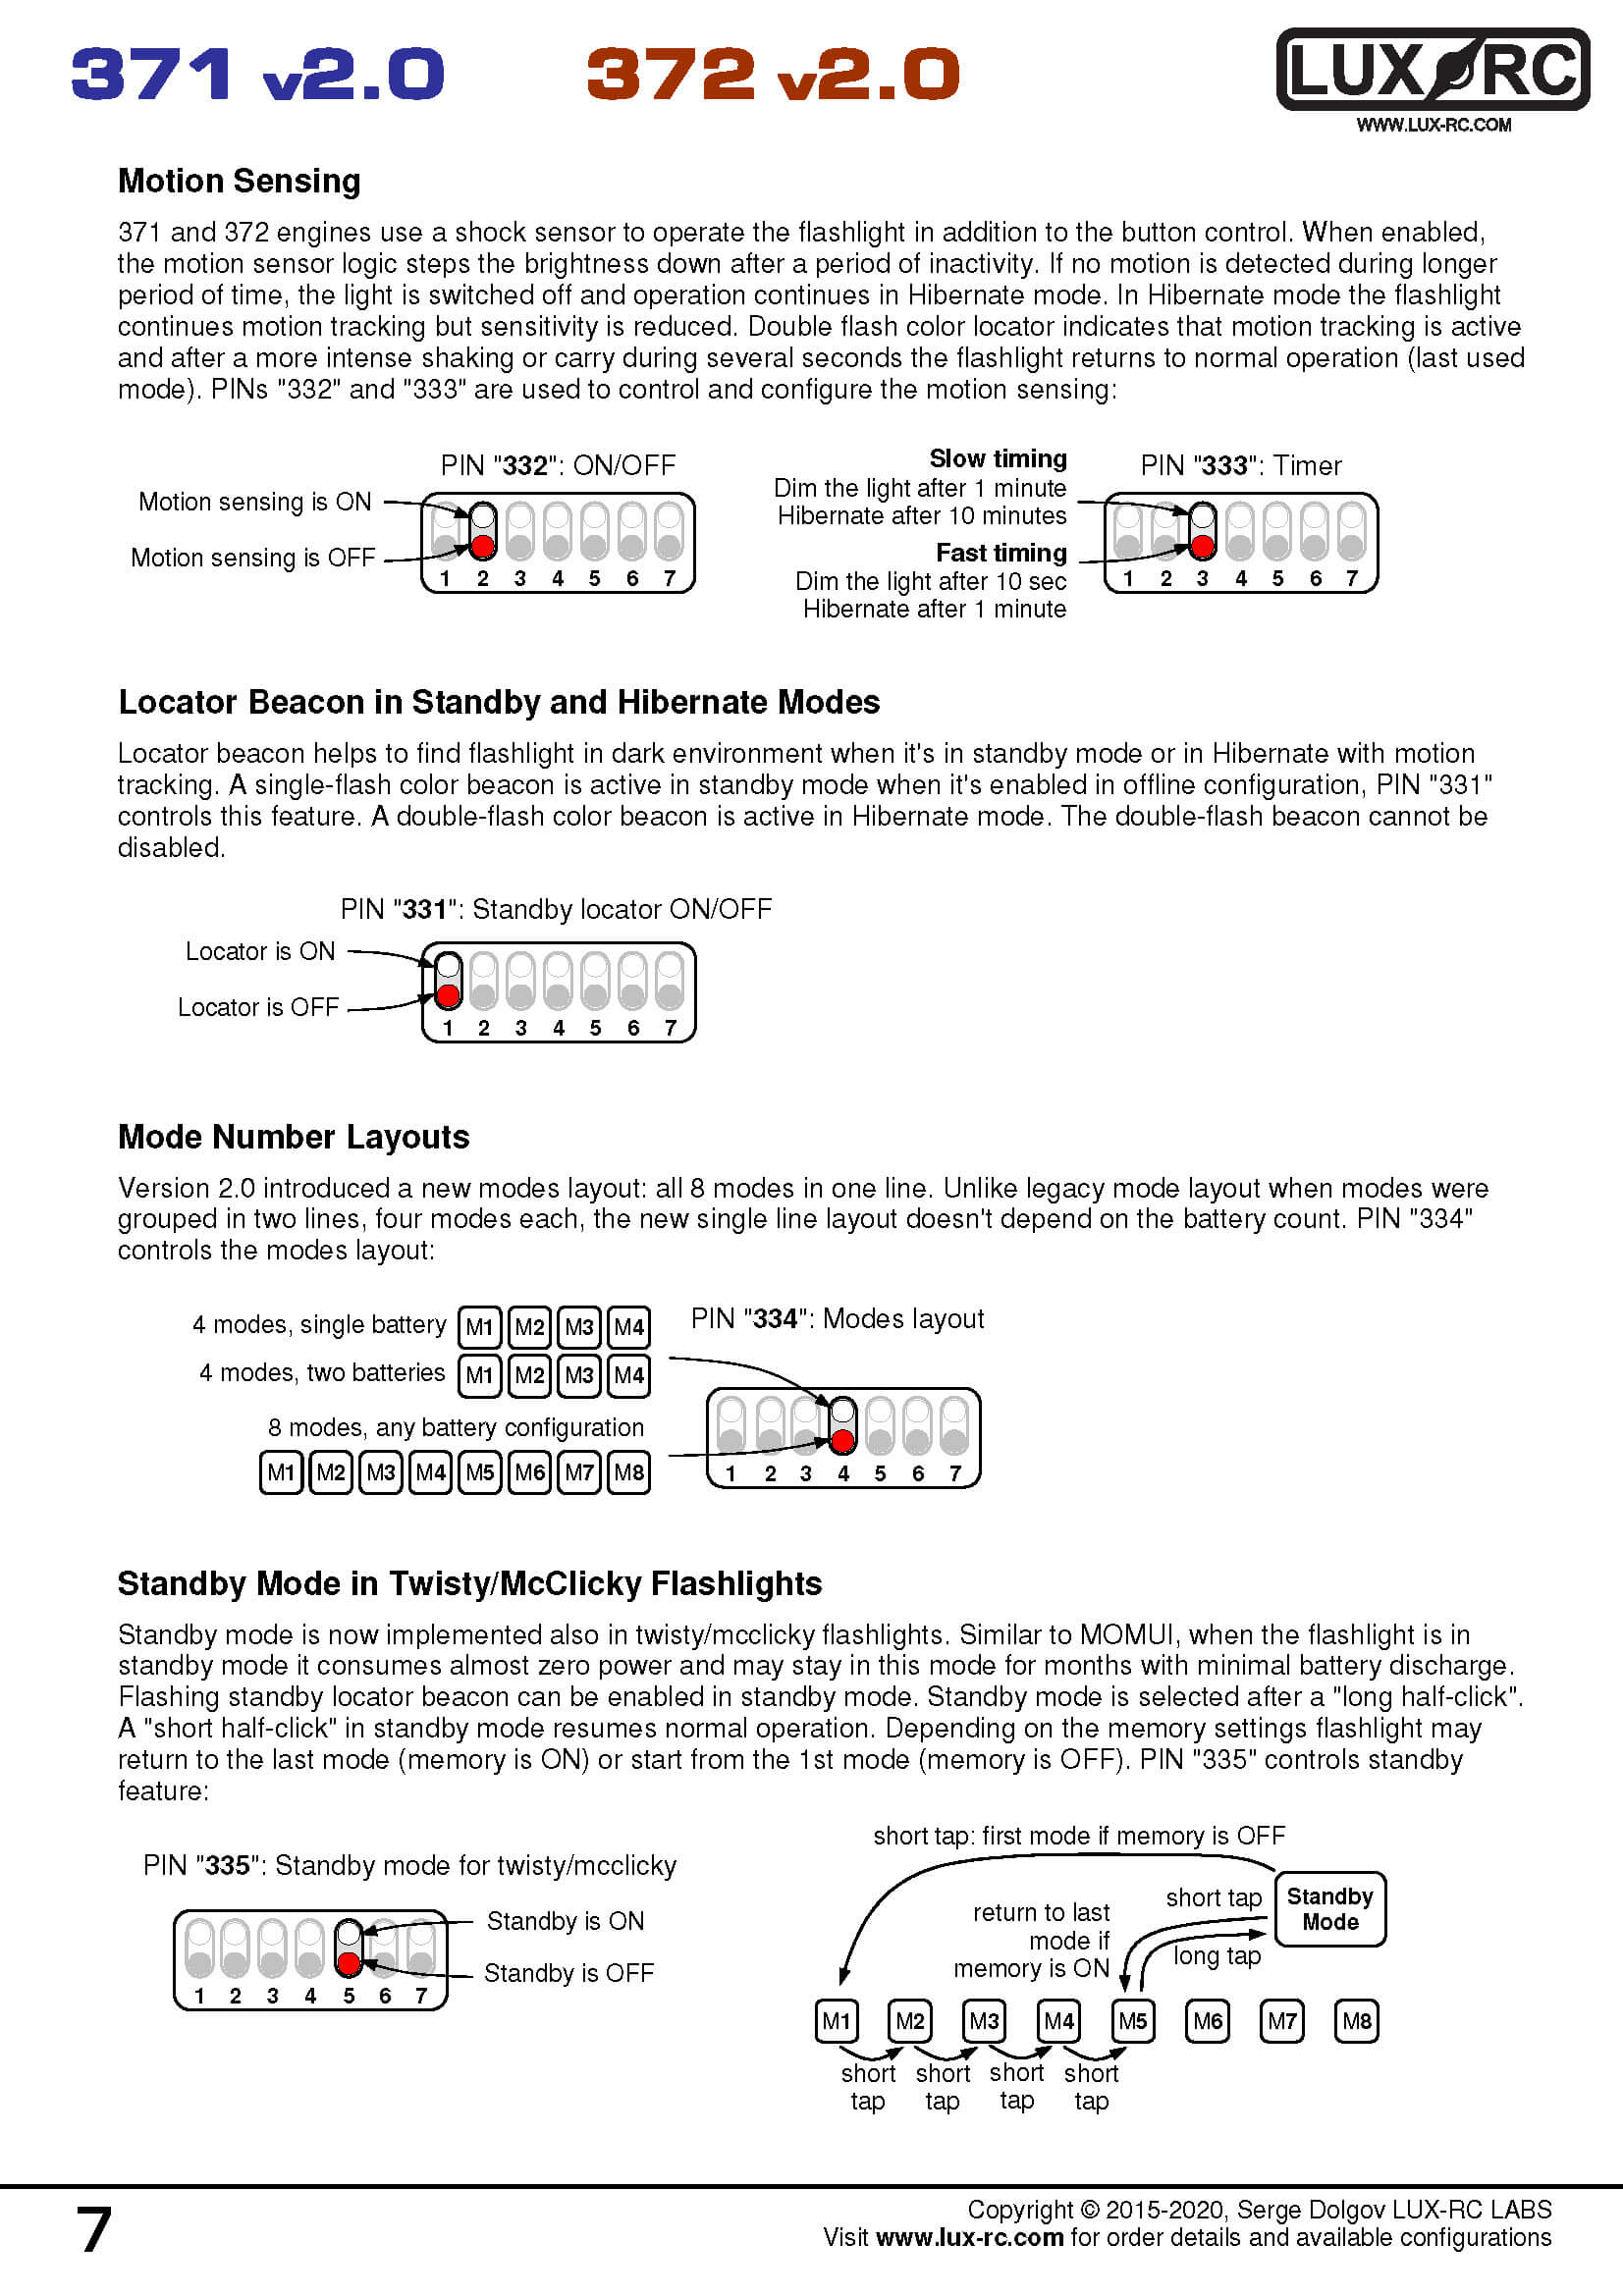 lux-rc 371d v2.0 manual in image format page 7